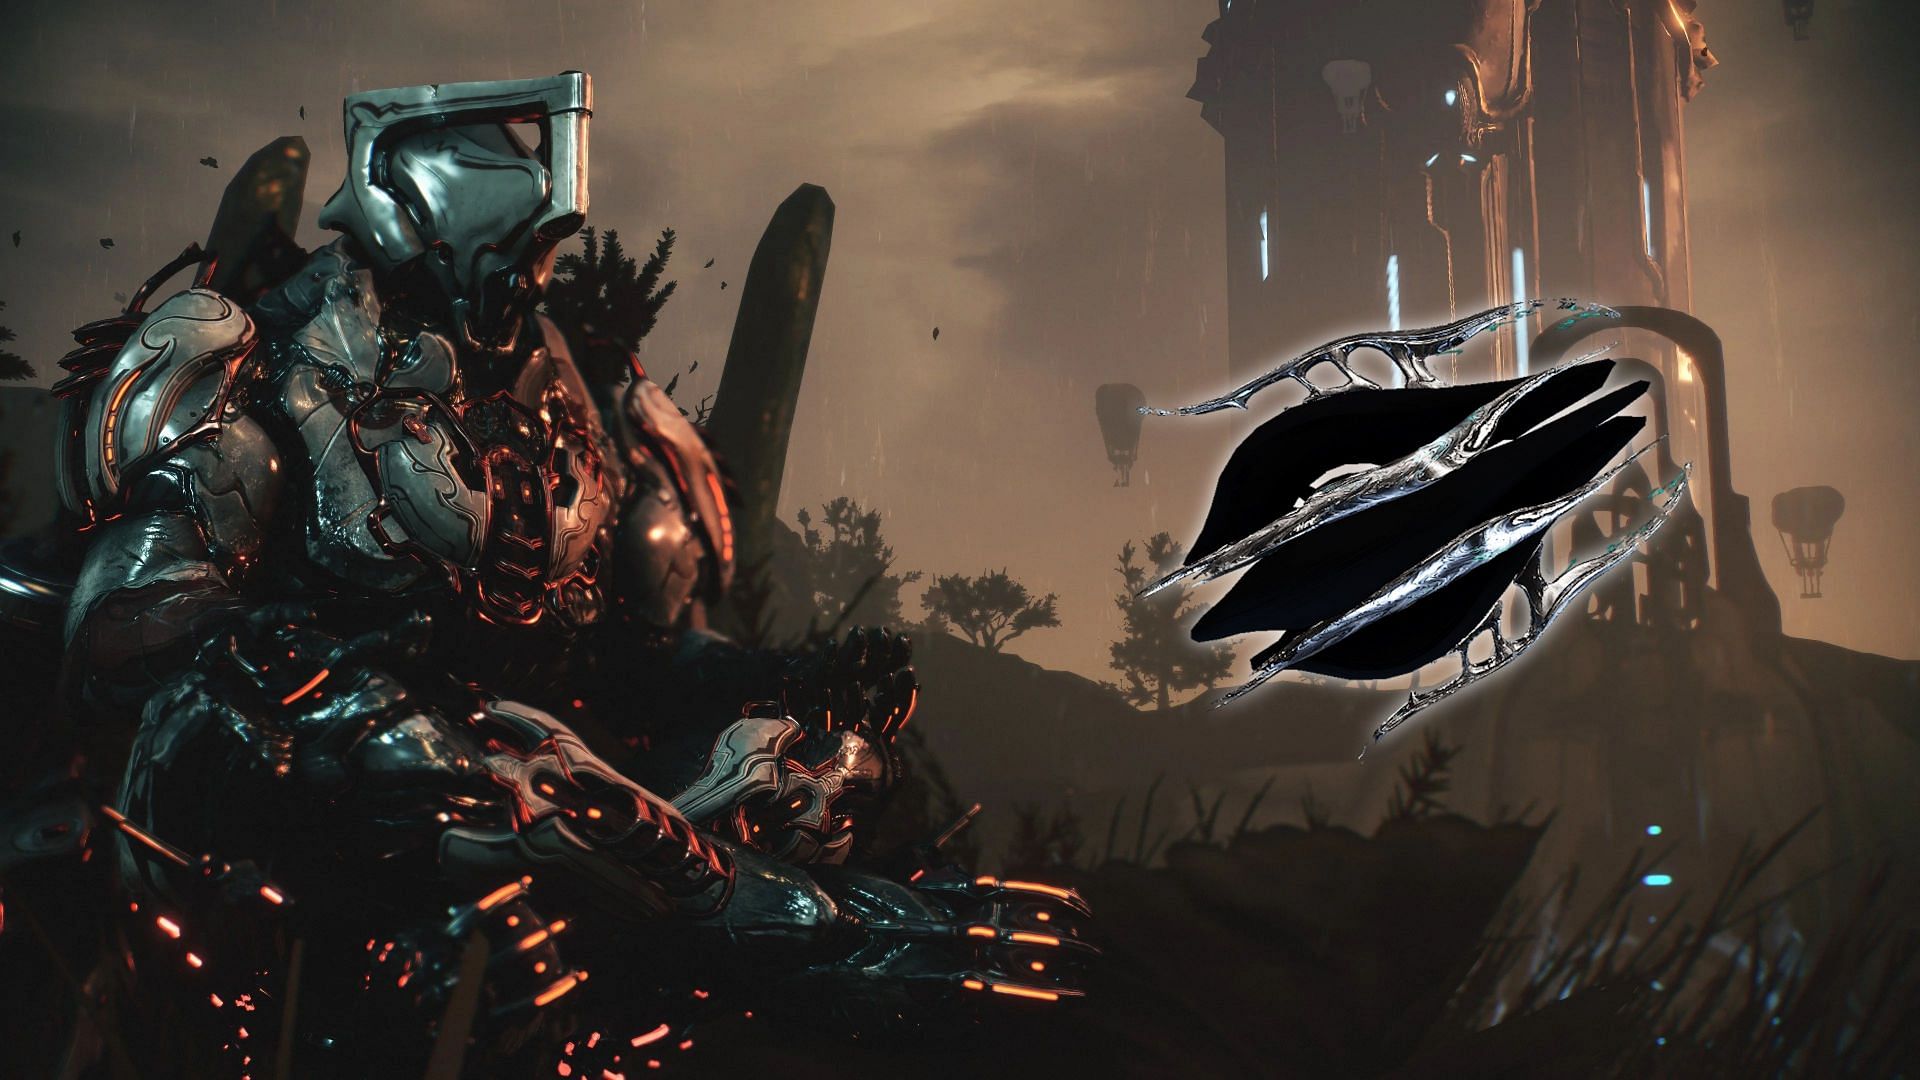 Warframe Synoid Gammacor Incarnon form sprite highlighed in front of a Rhino captura